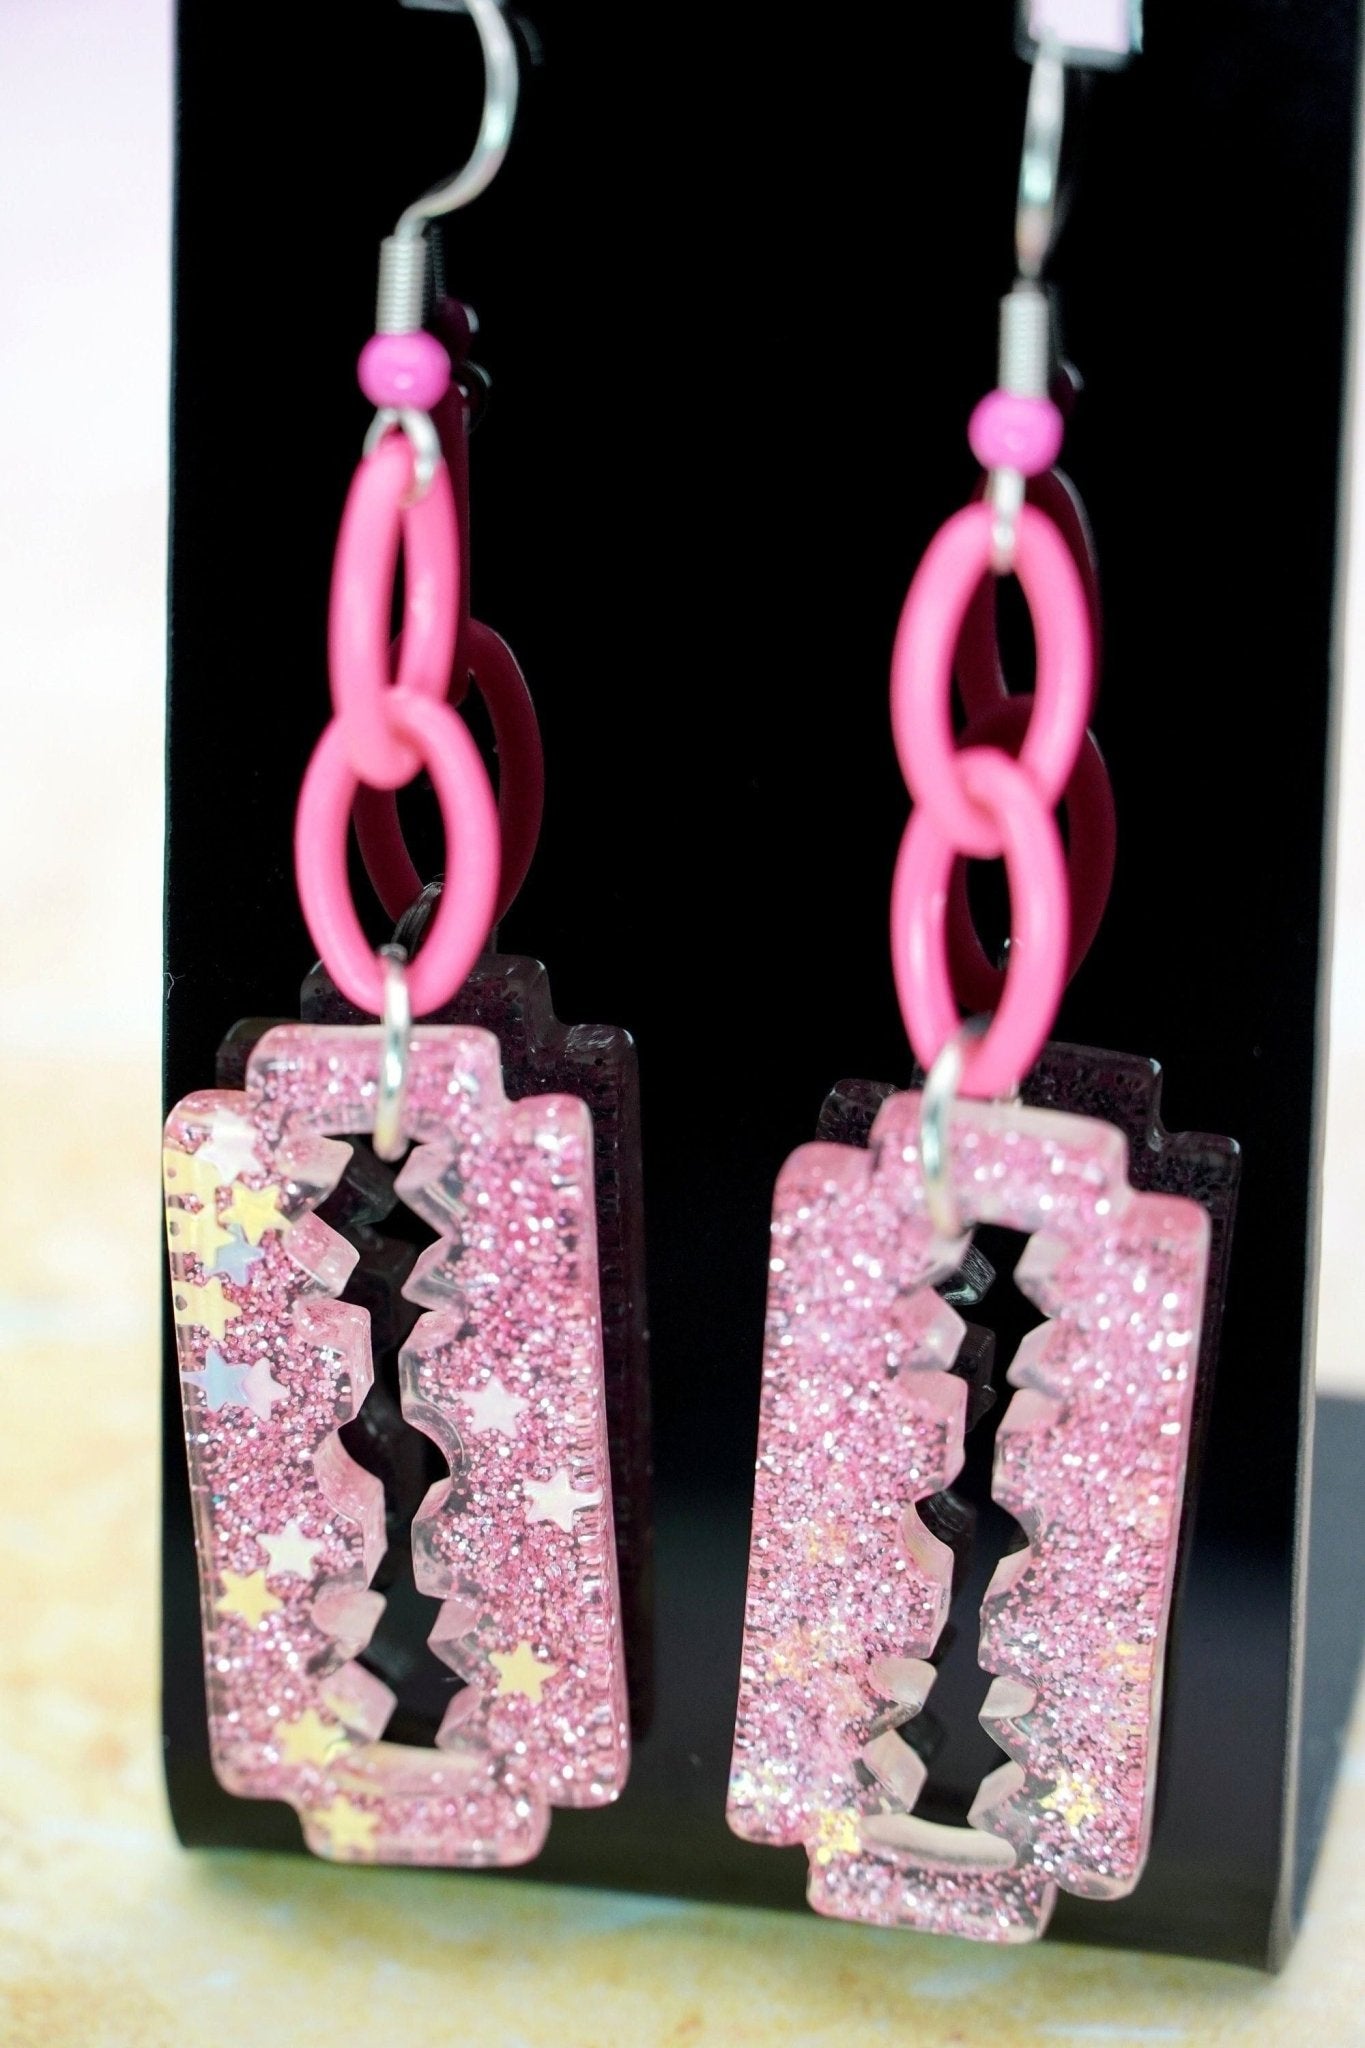 Pink Sparkly Razorblade Earrings with Acrylic Pink Chains and Pink Accented Stainless Steel Earring Hooks, YamiKawaii/Menehara Kei Fashion - Dekowaii Jewelry Company